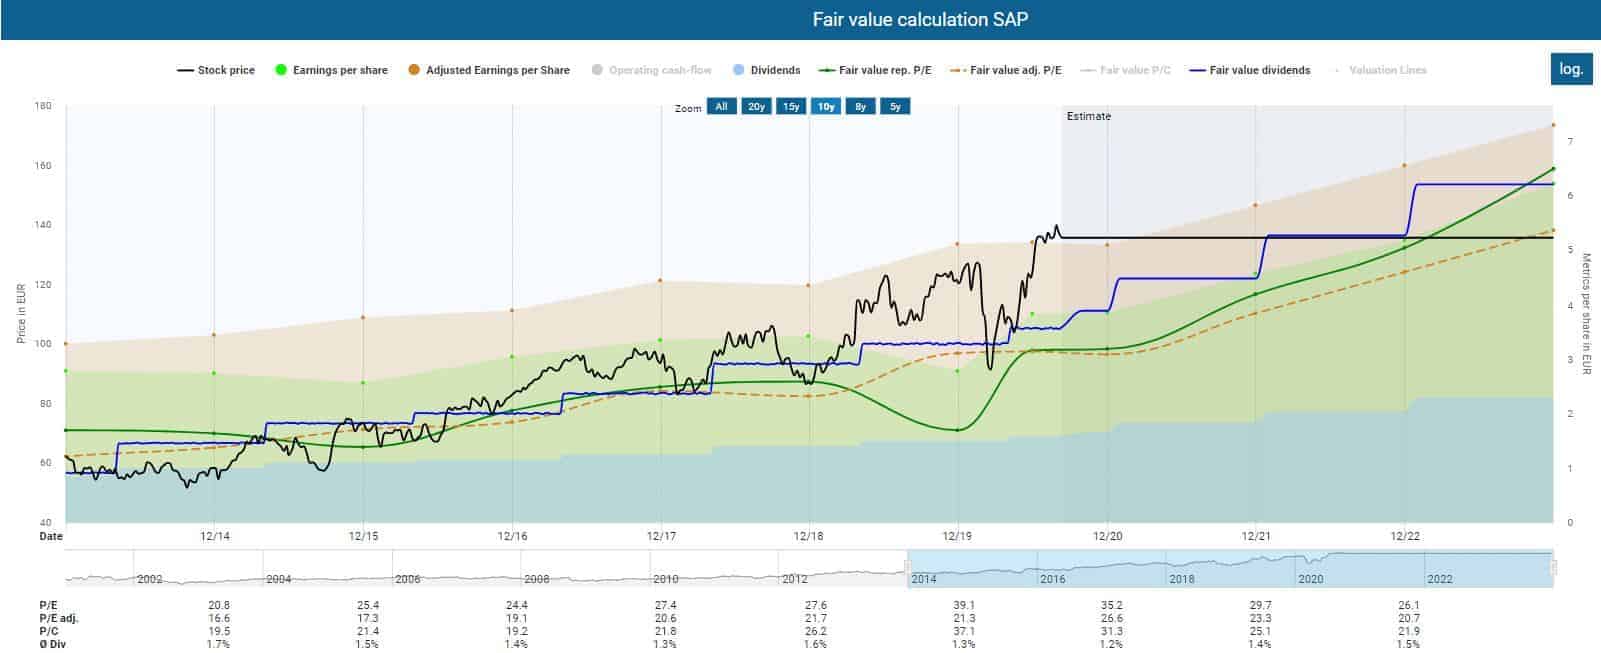 Valuation of the SAP stock